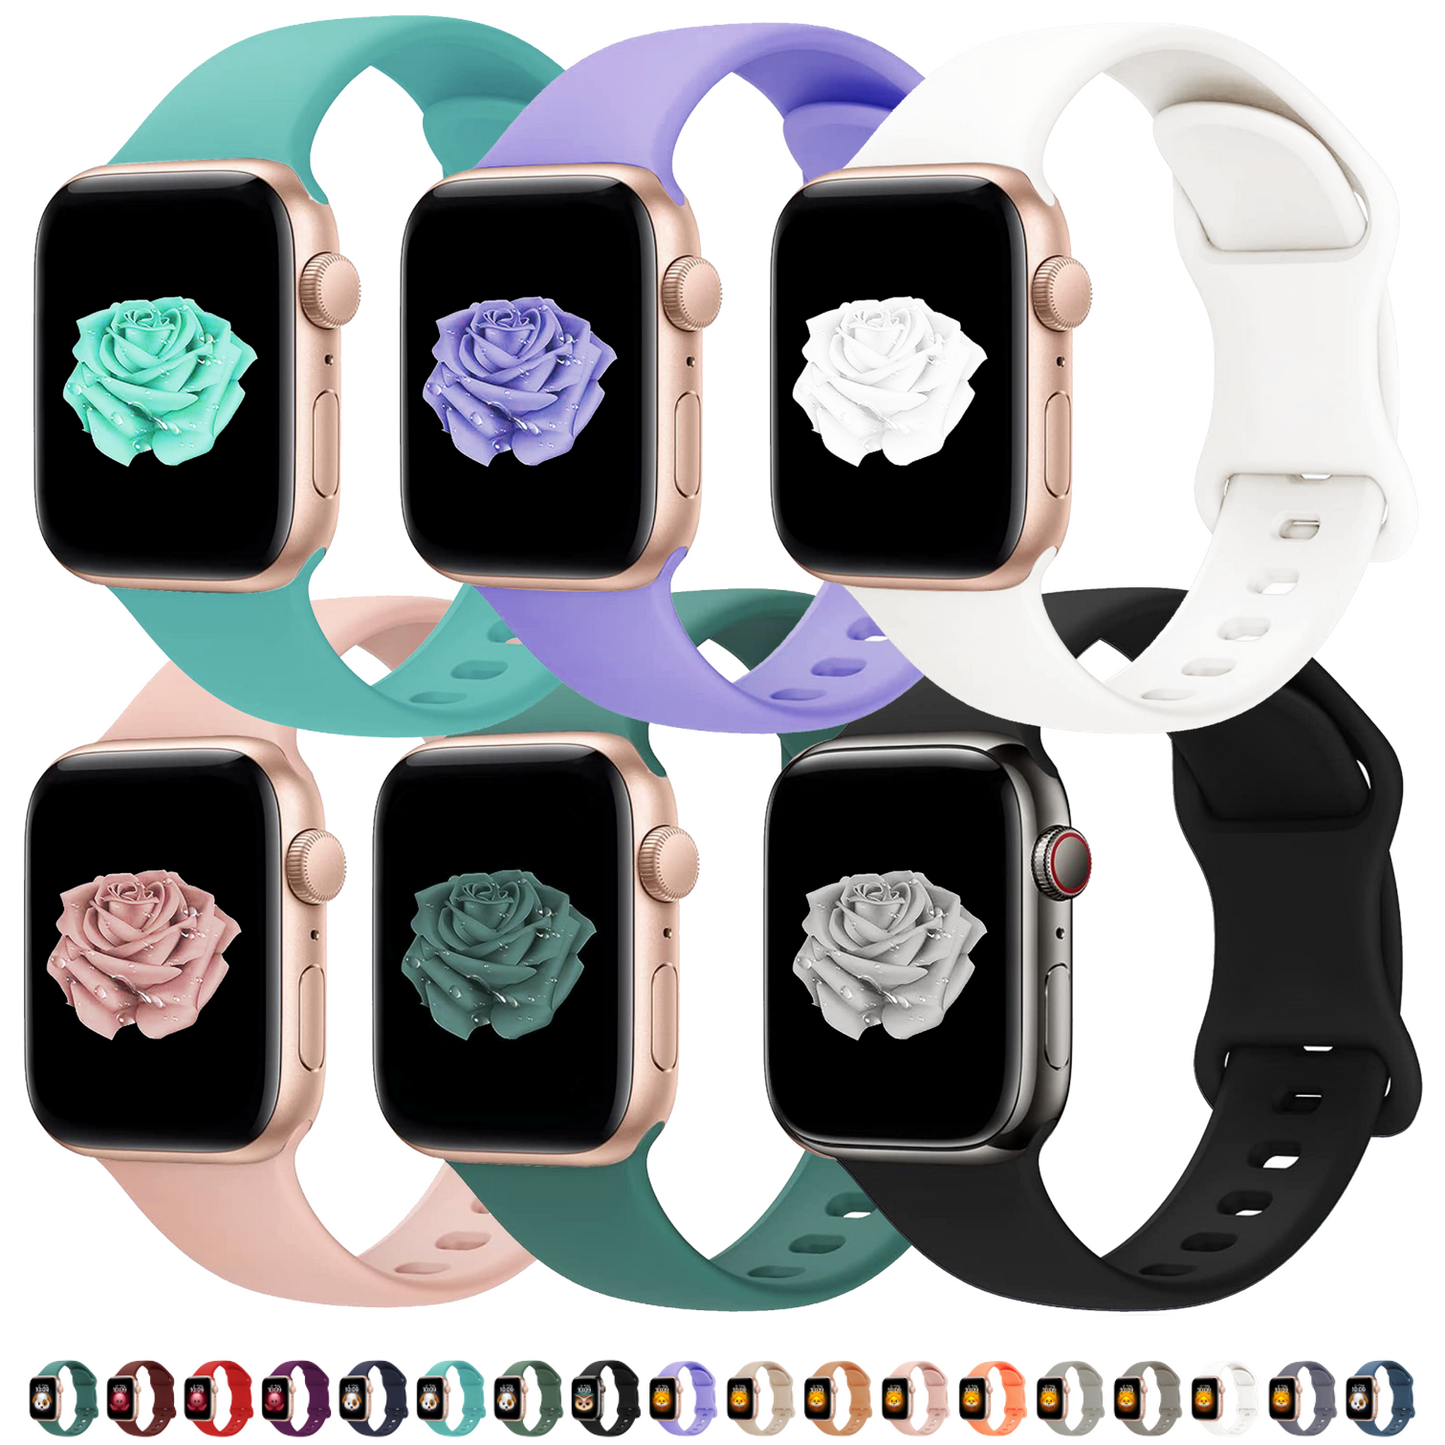 Silicone Apple Watch Sport Band, 6 Pack